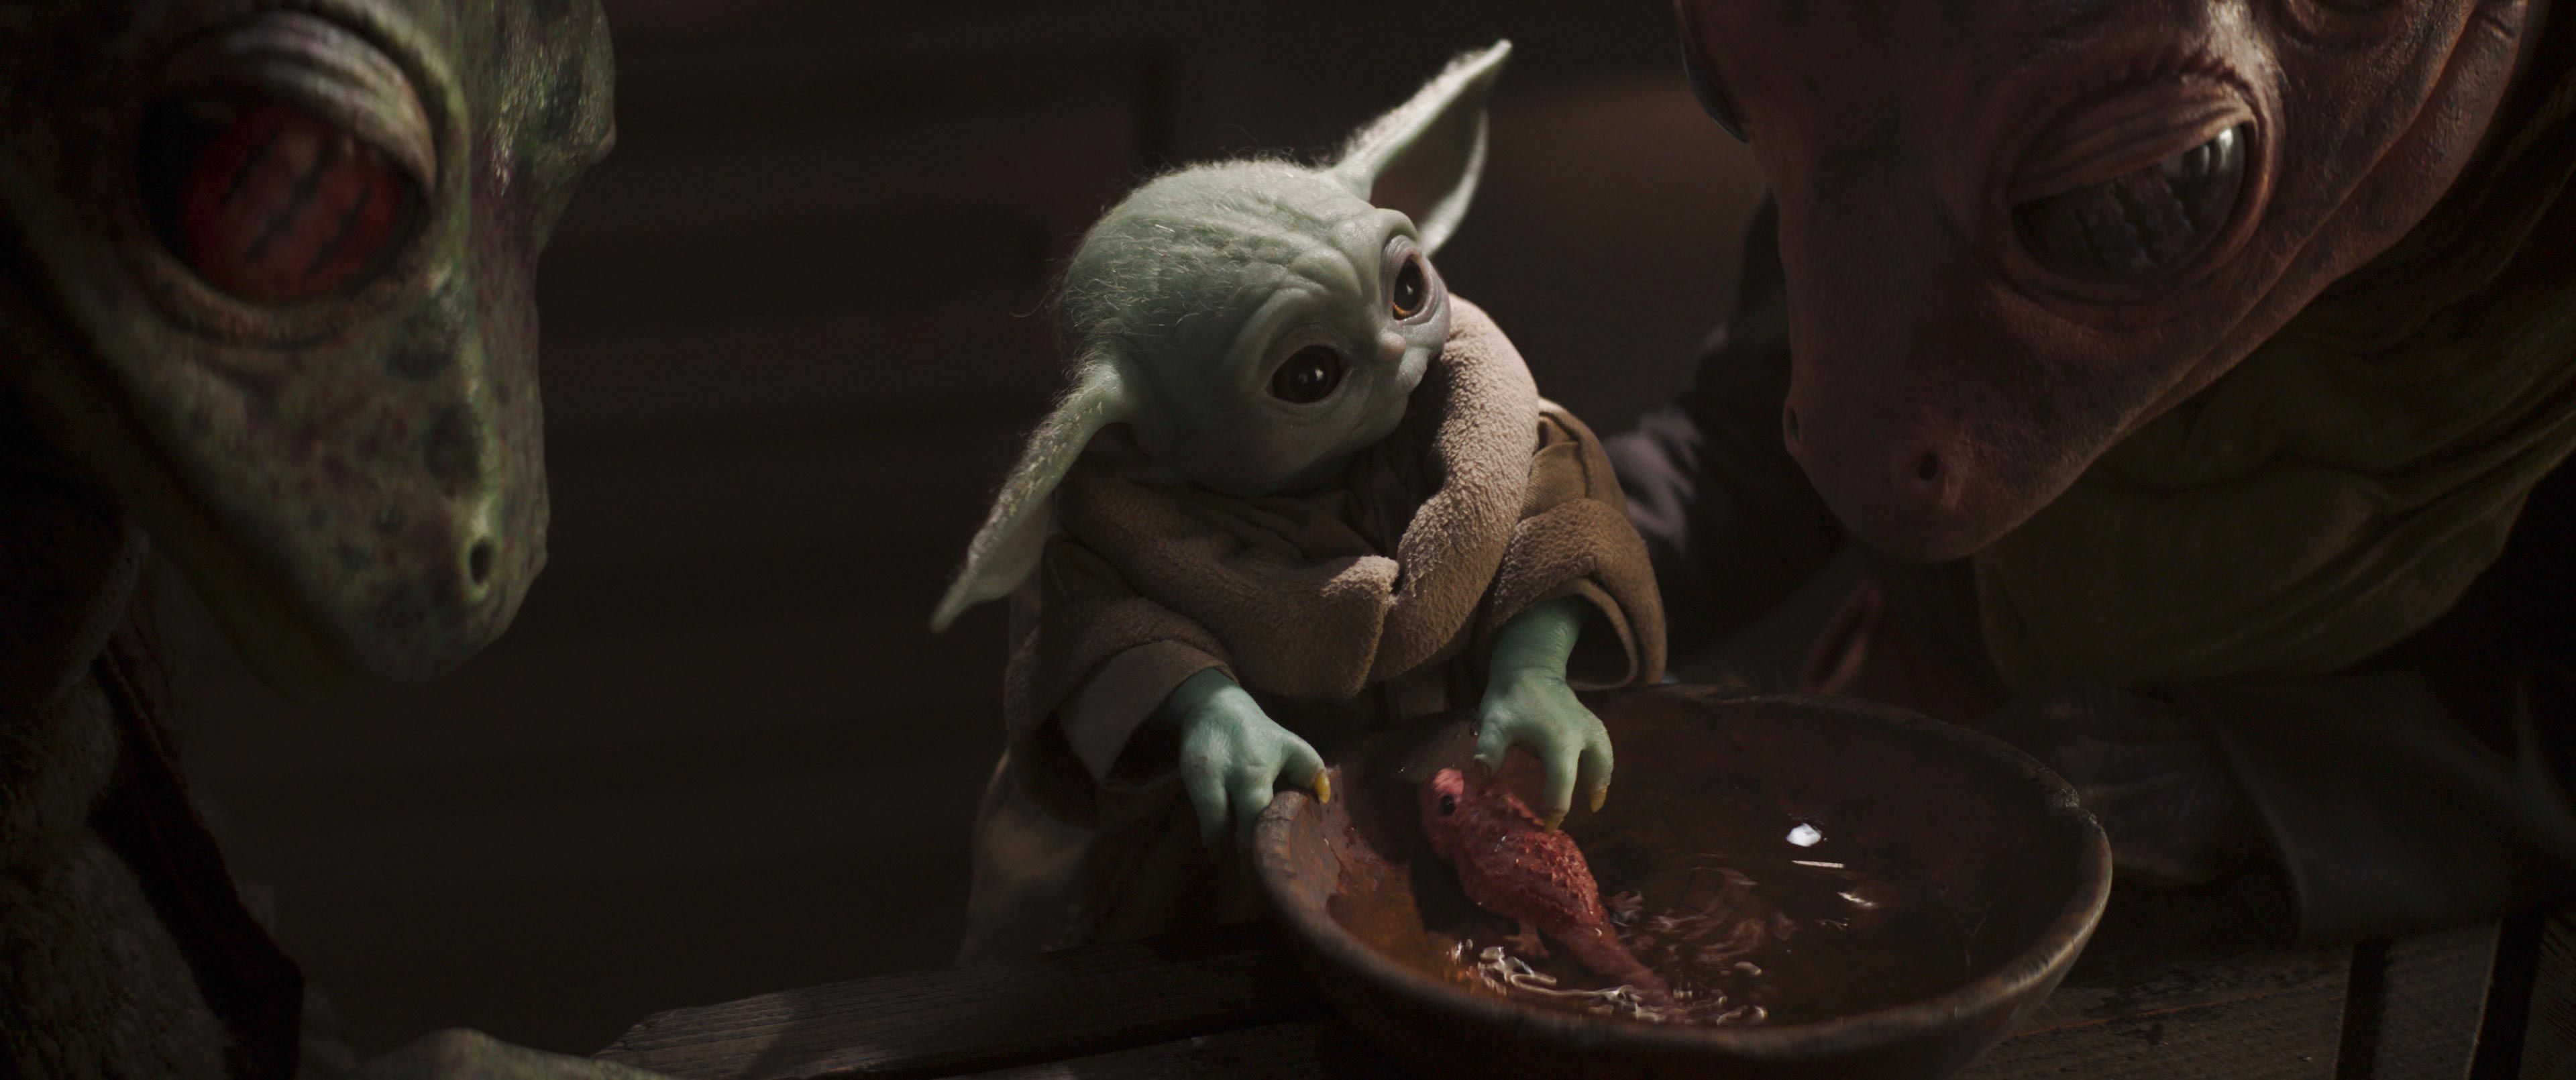 The Mandalorian has been changed forever by that Baby Yoda reveal